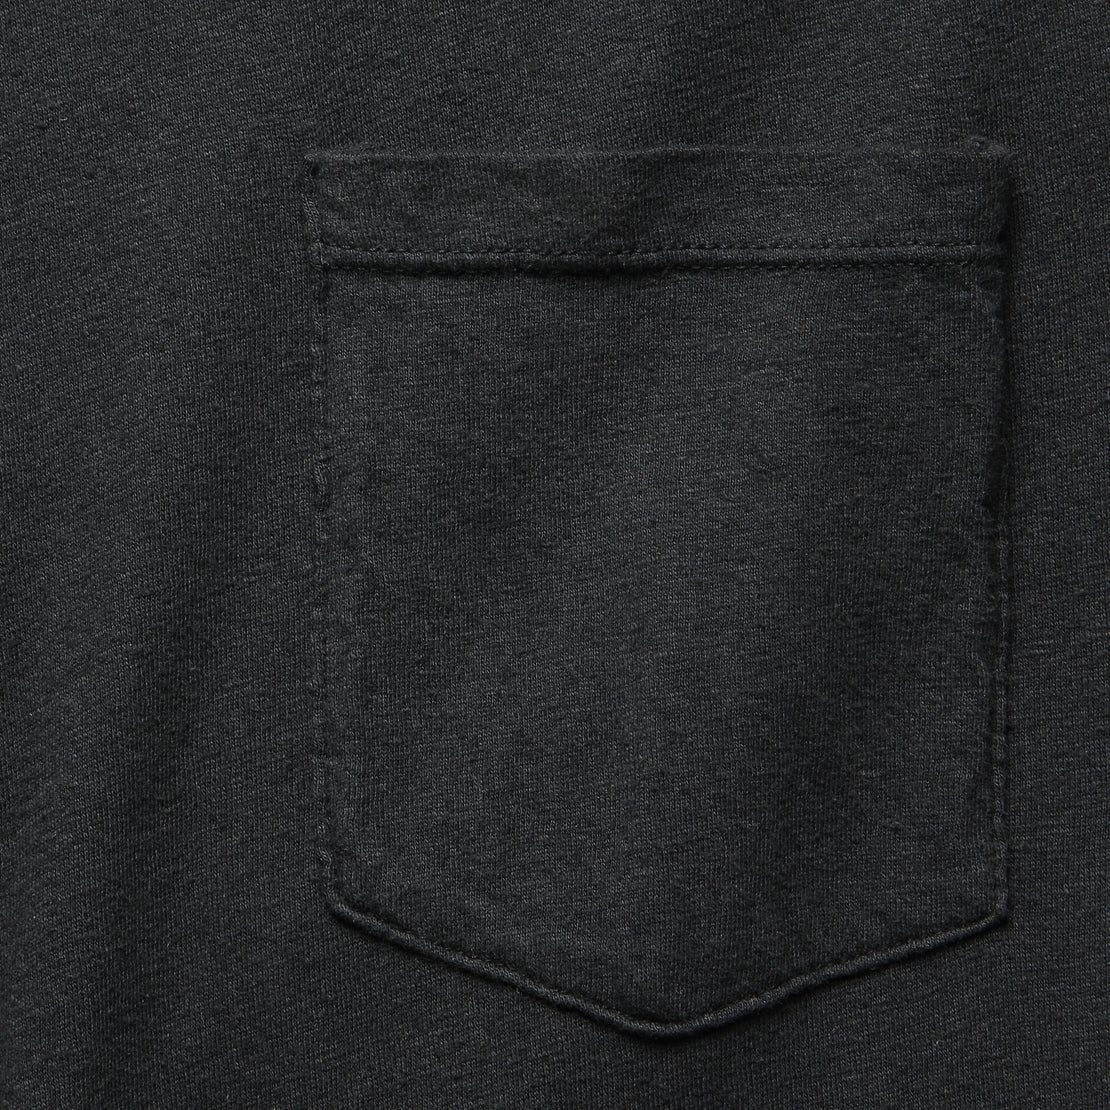 Pocket Tee - Faded Black - Imogene + Willie - STAG Provisions - Tops - S/S Tee